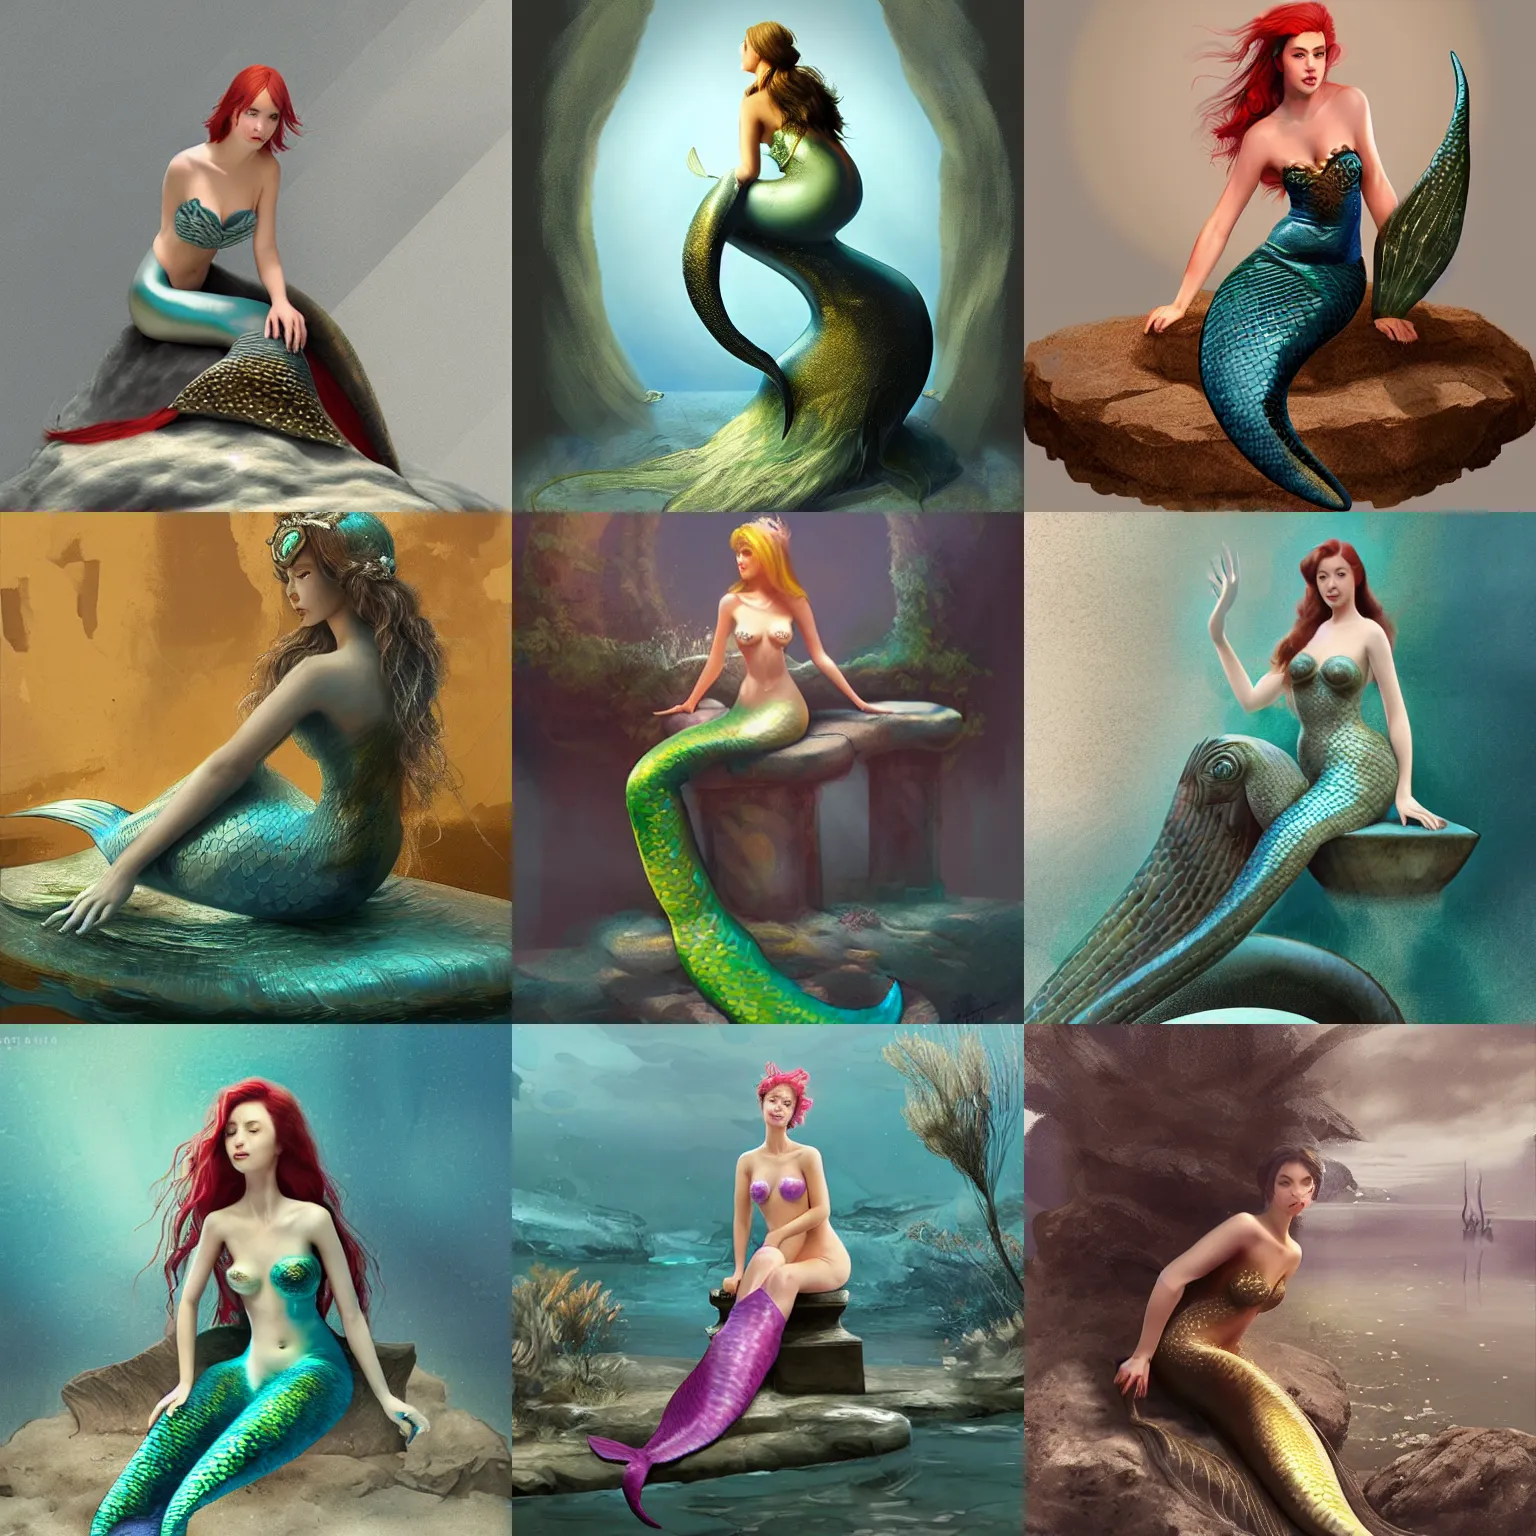 Prompt: woman in a mermaid costume, sitting on a pedestal, as an exhibit in an art gallery, concept art, digital art, by xiaoguang sun